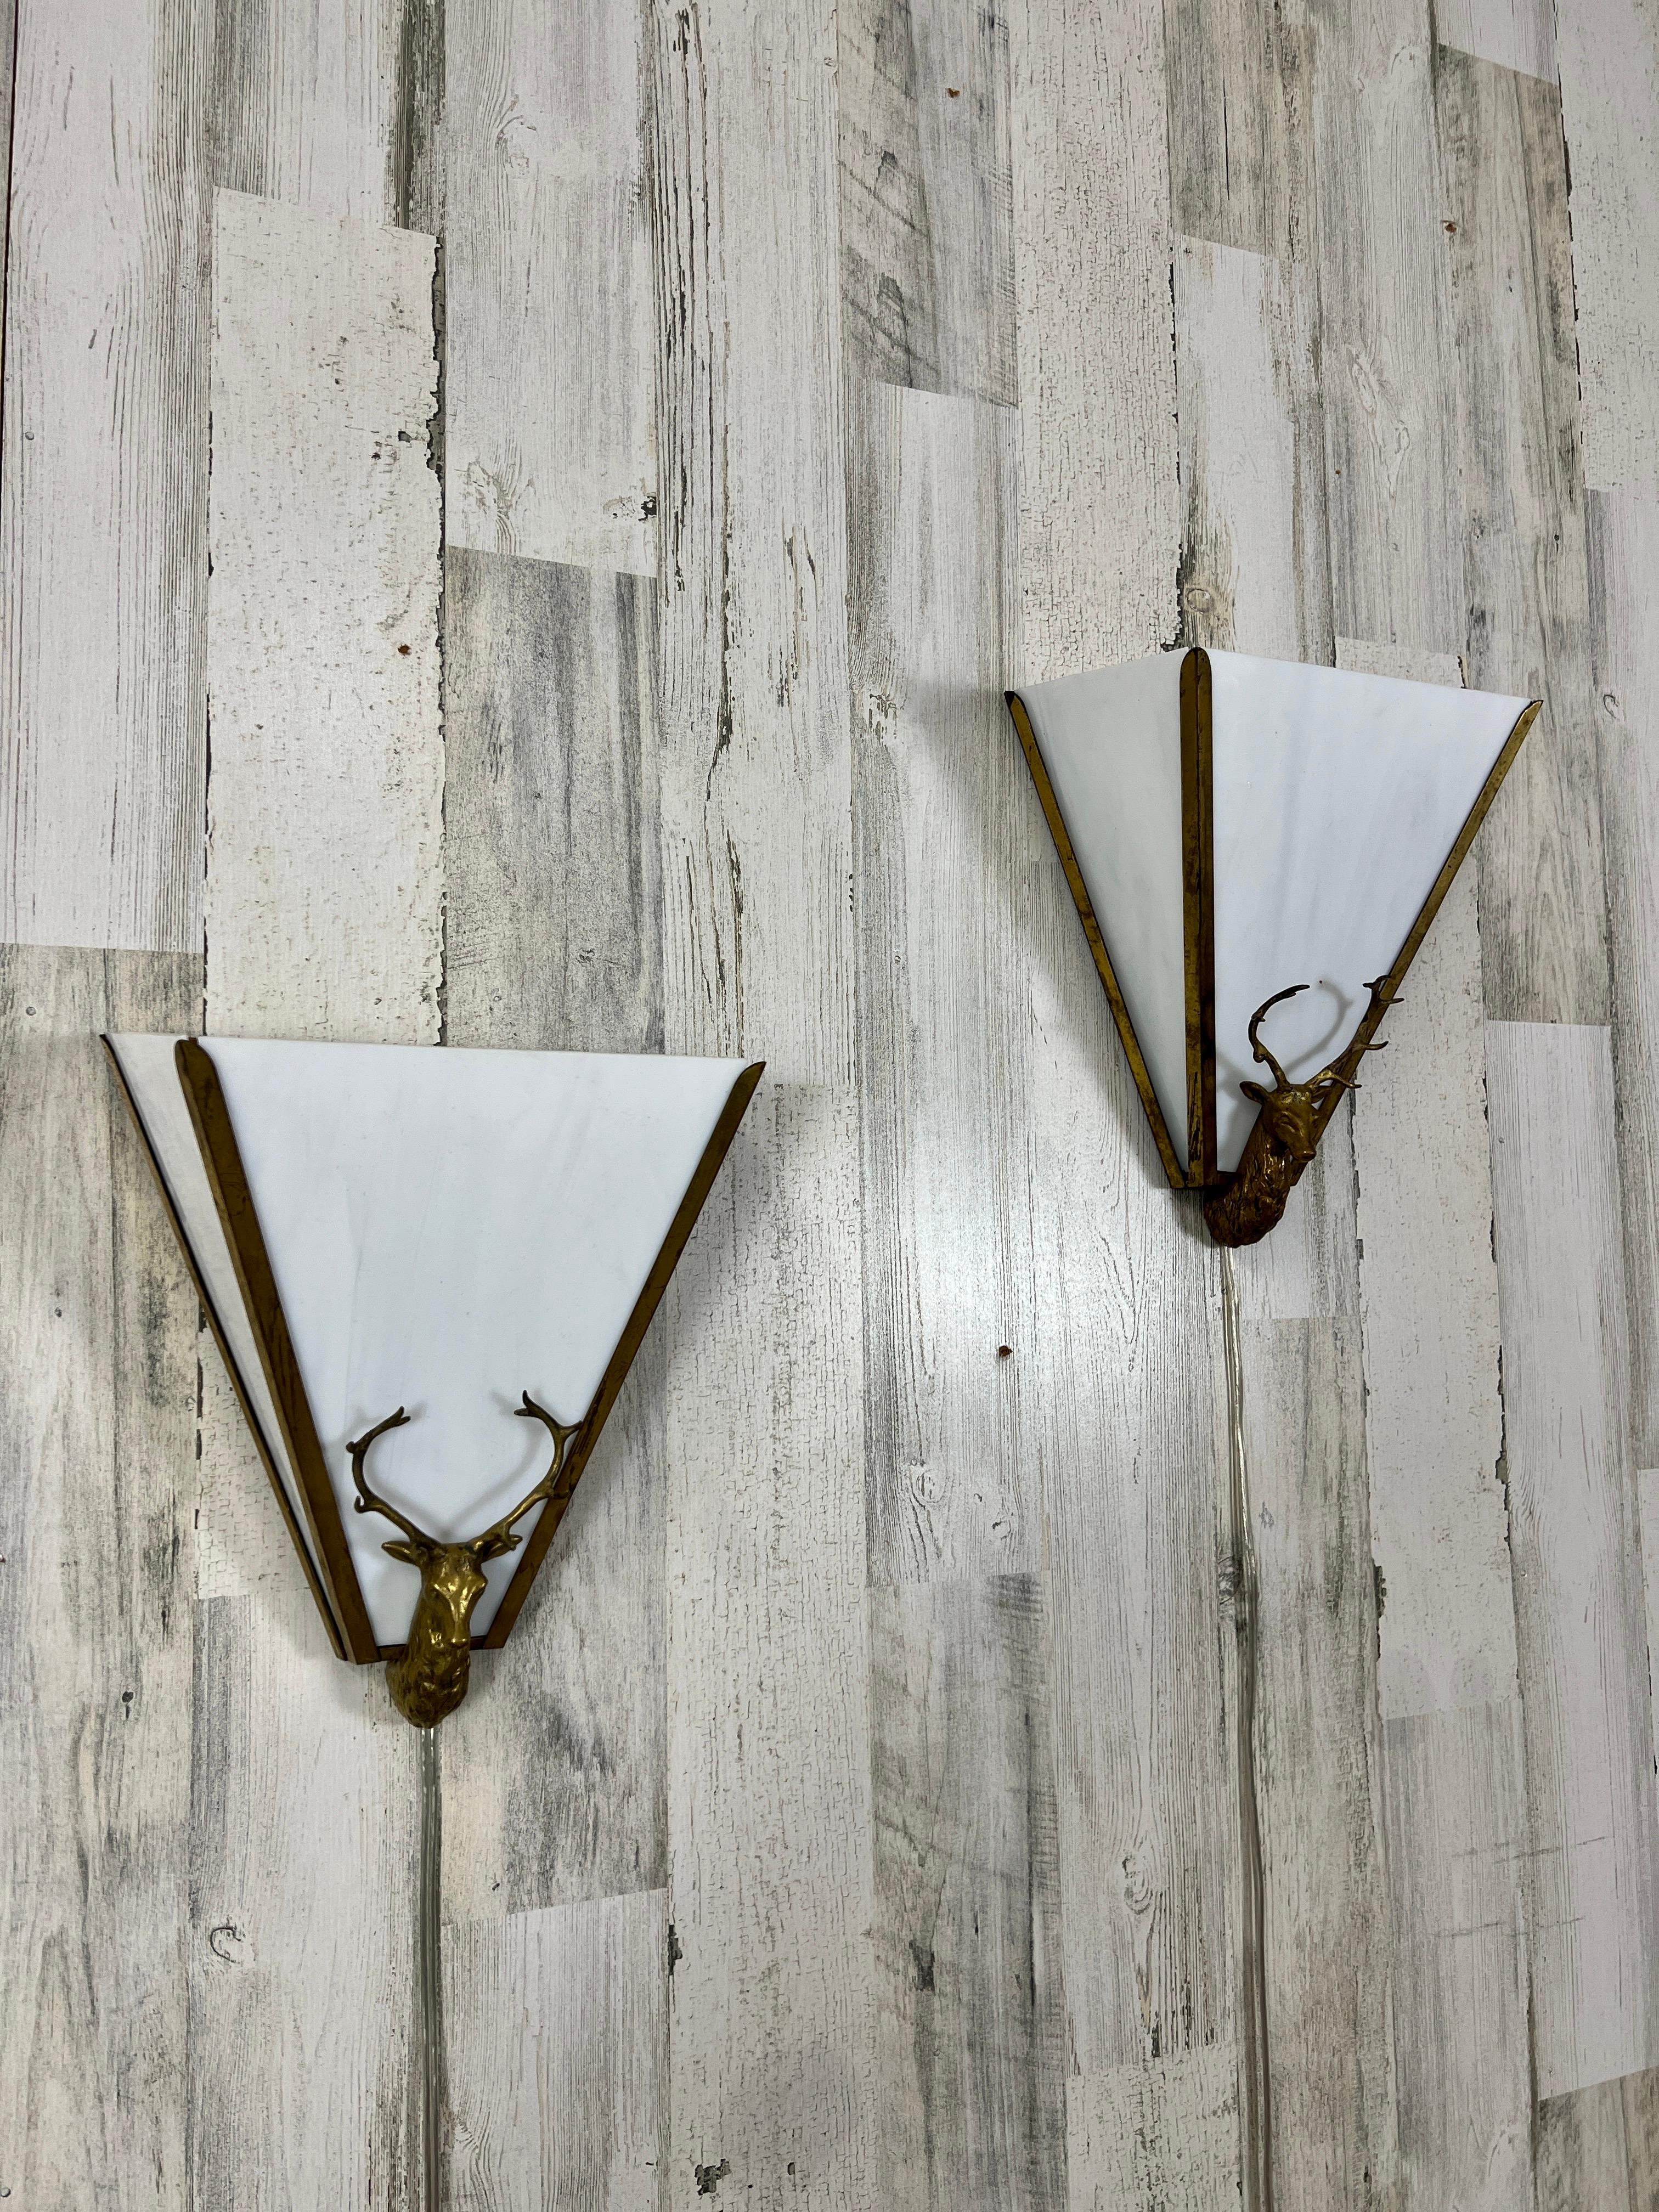 Very dramatic angled slip shade sconces with glass and brass deer head mounted on the front.